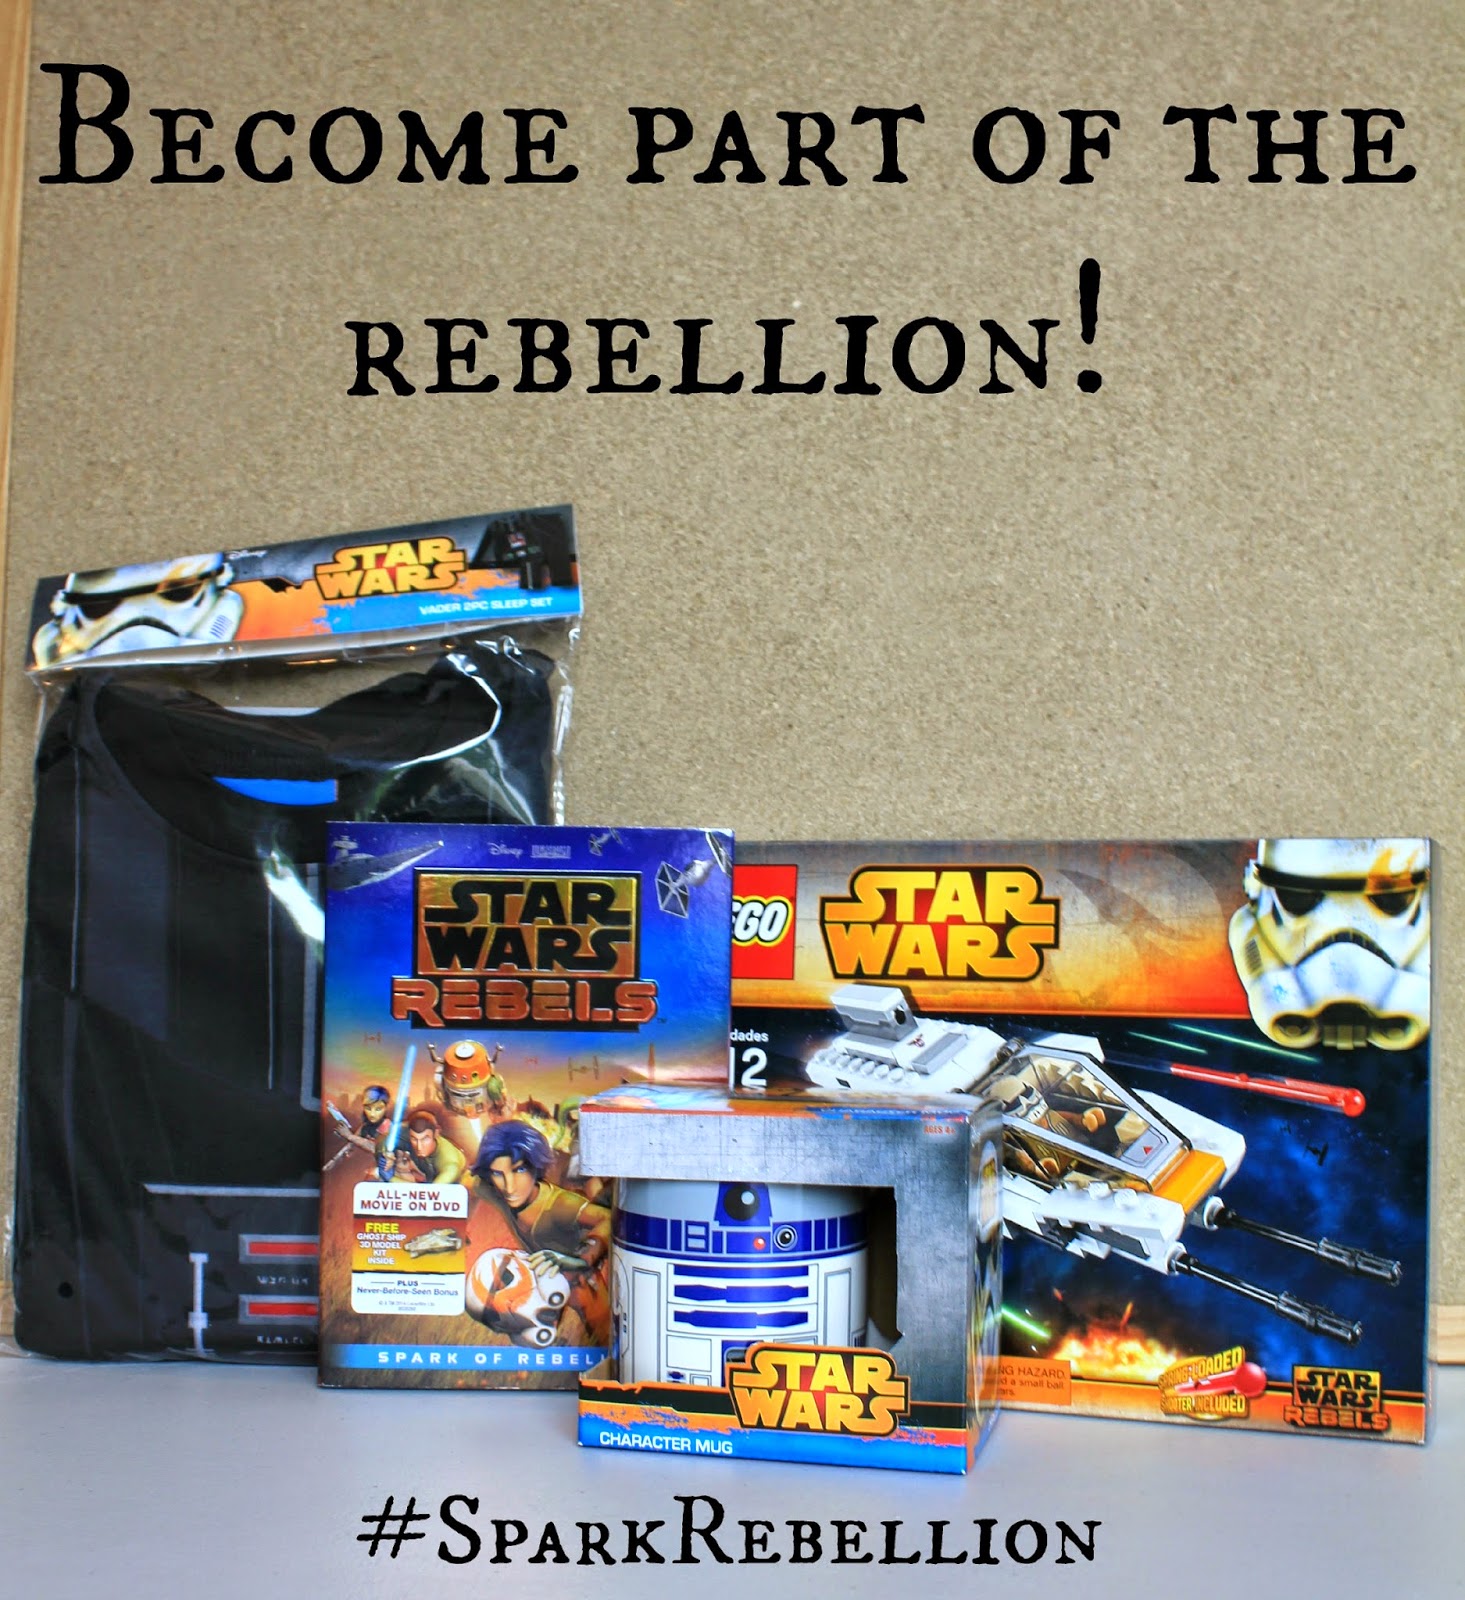 Become part of the rebellion with Star Wars Rebels! #SparkRebellion #shop